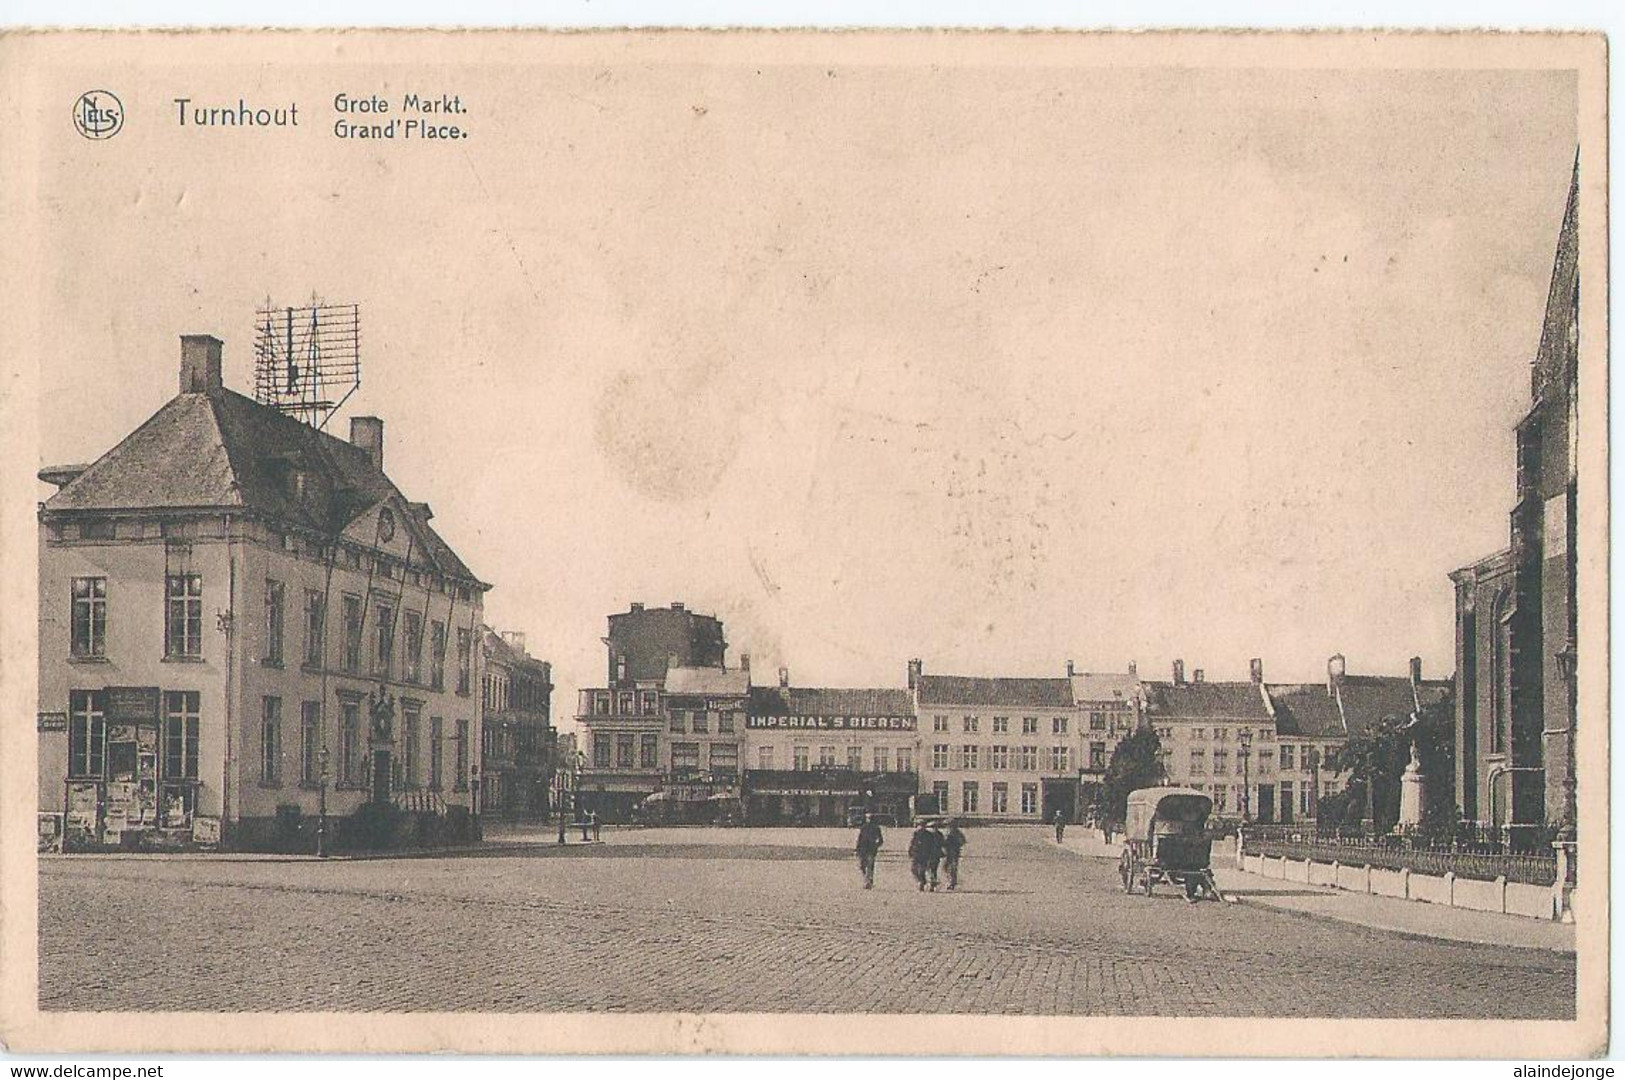 Turnhout - Grote Markt - Grand'Place - 1951 - Turnhout